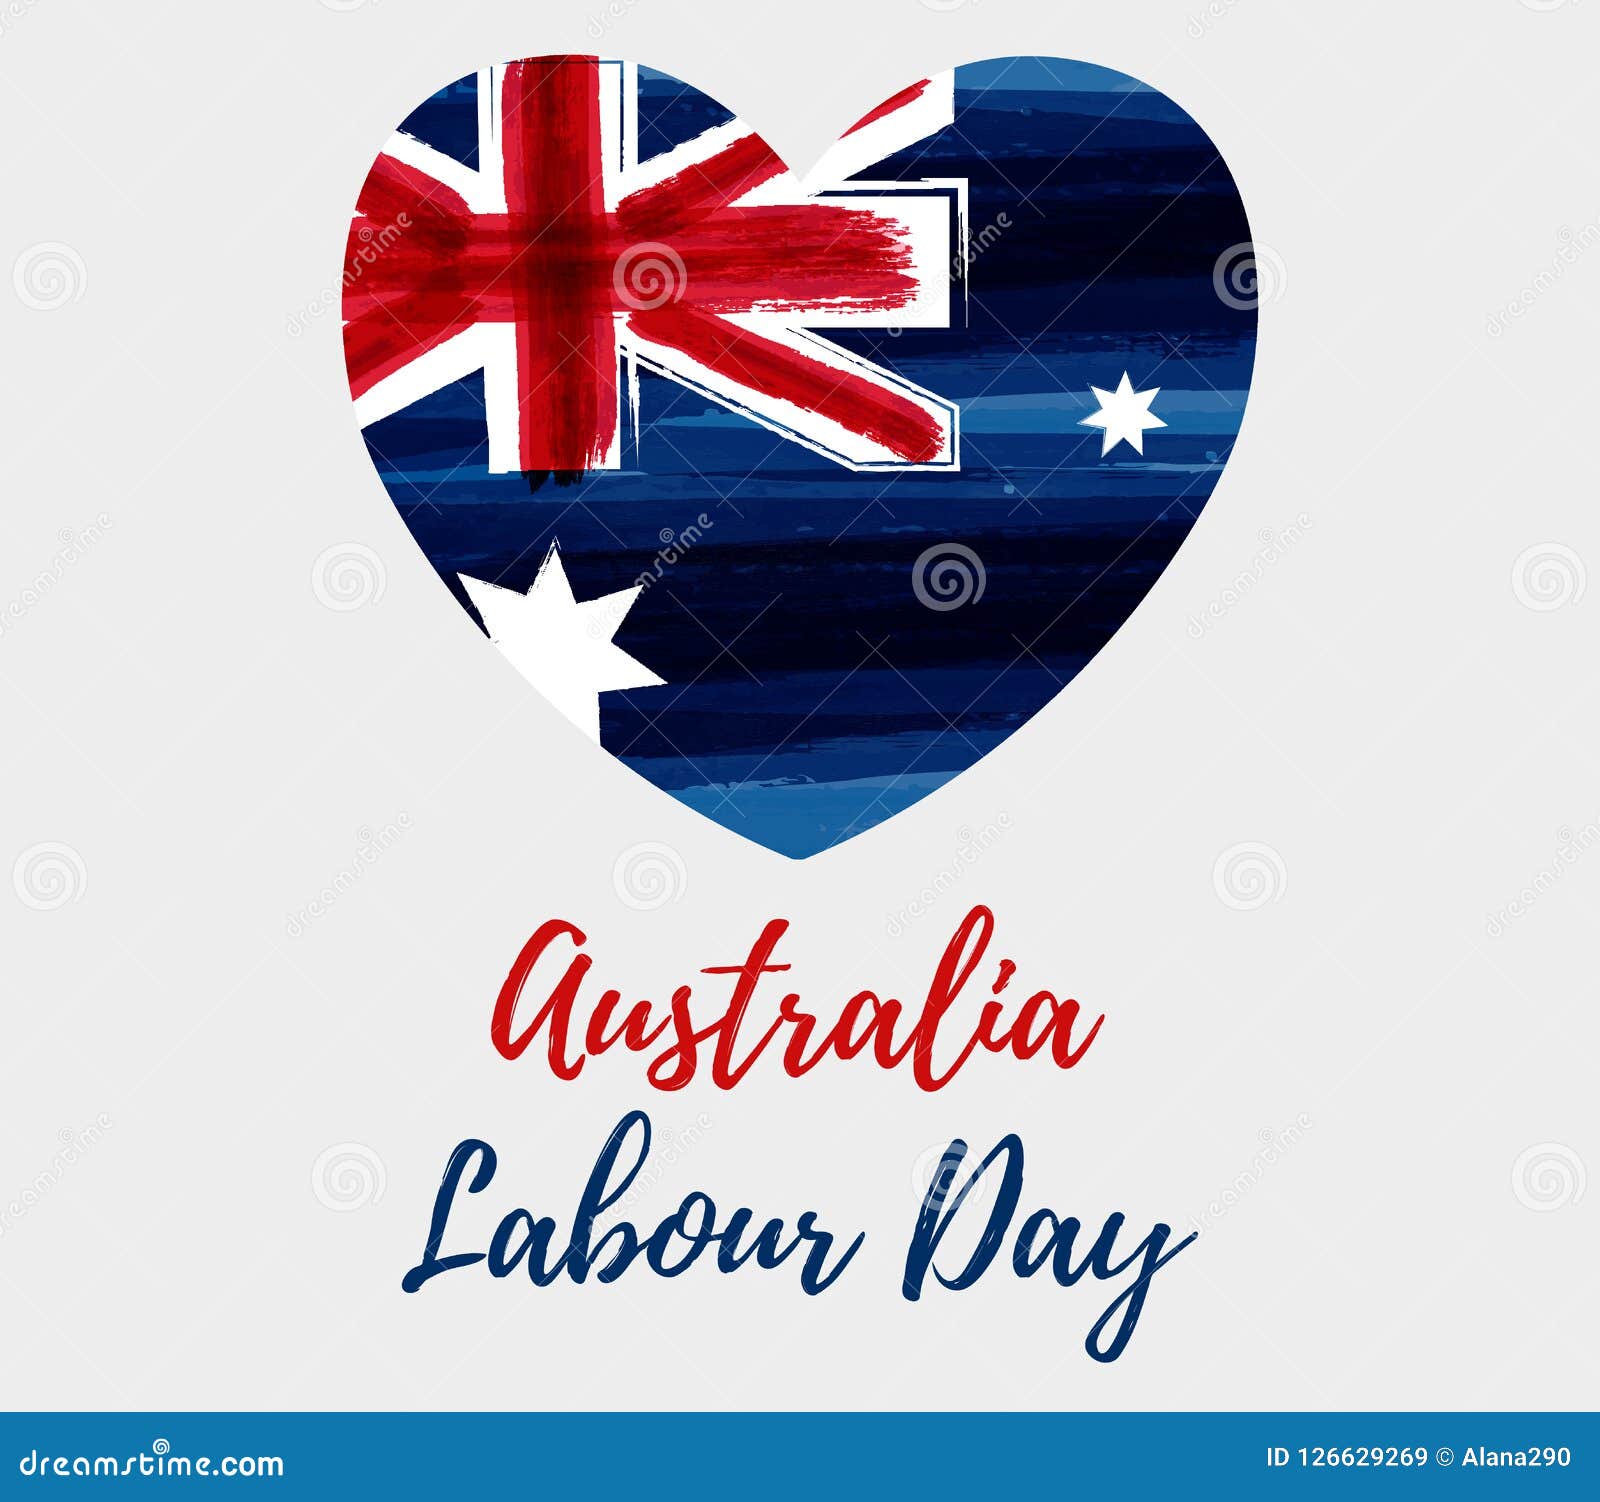 Australia Labour Day Holiday. Stock Vector Illustration of celebrate